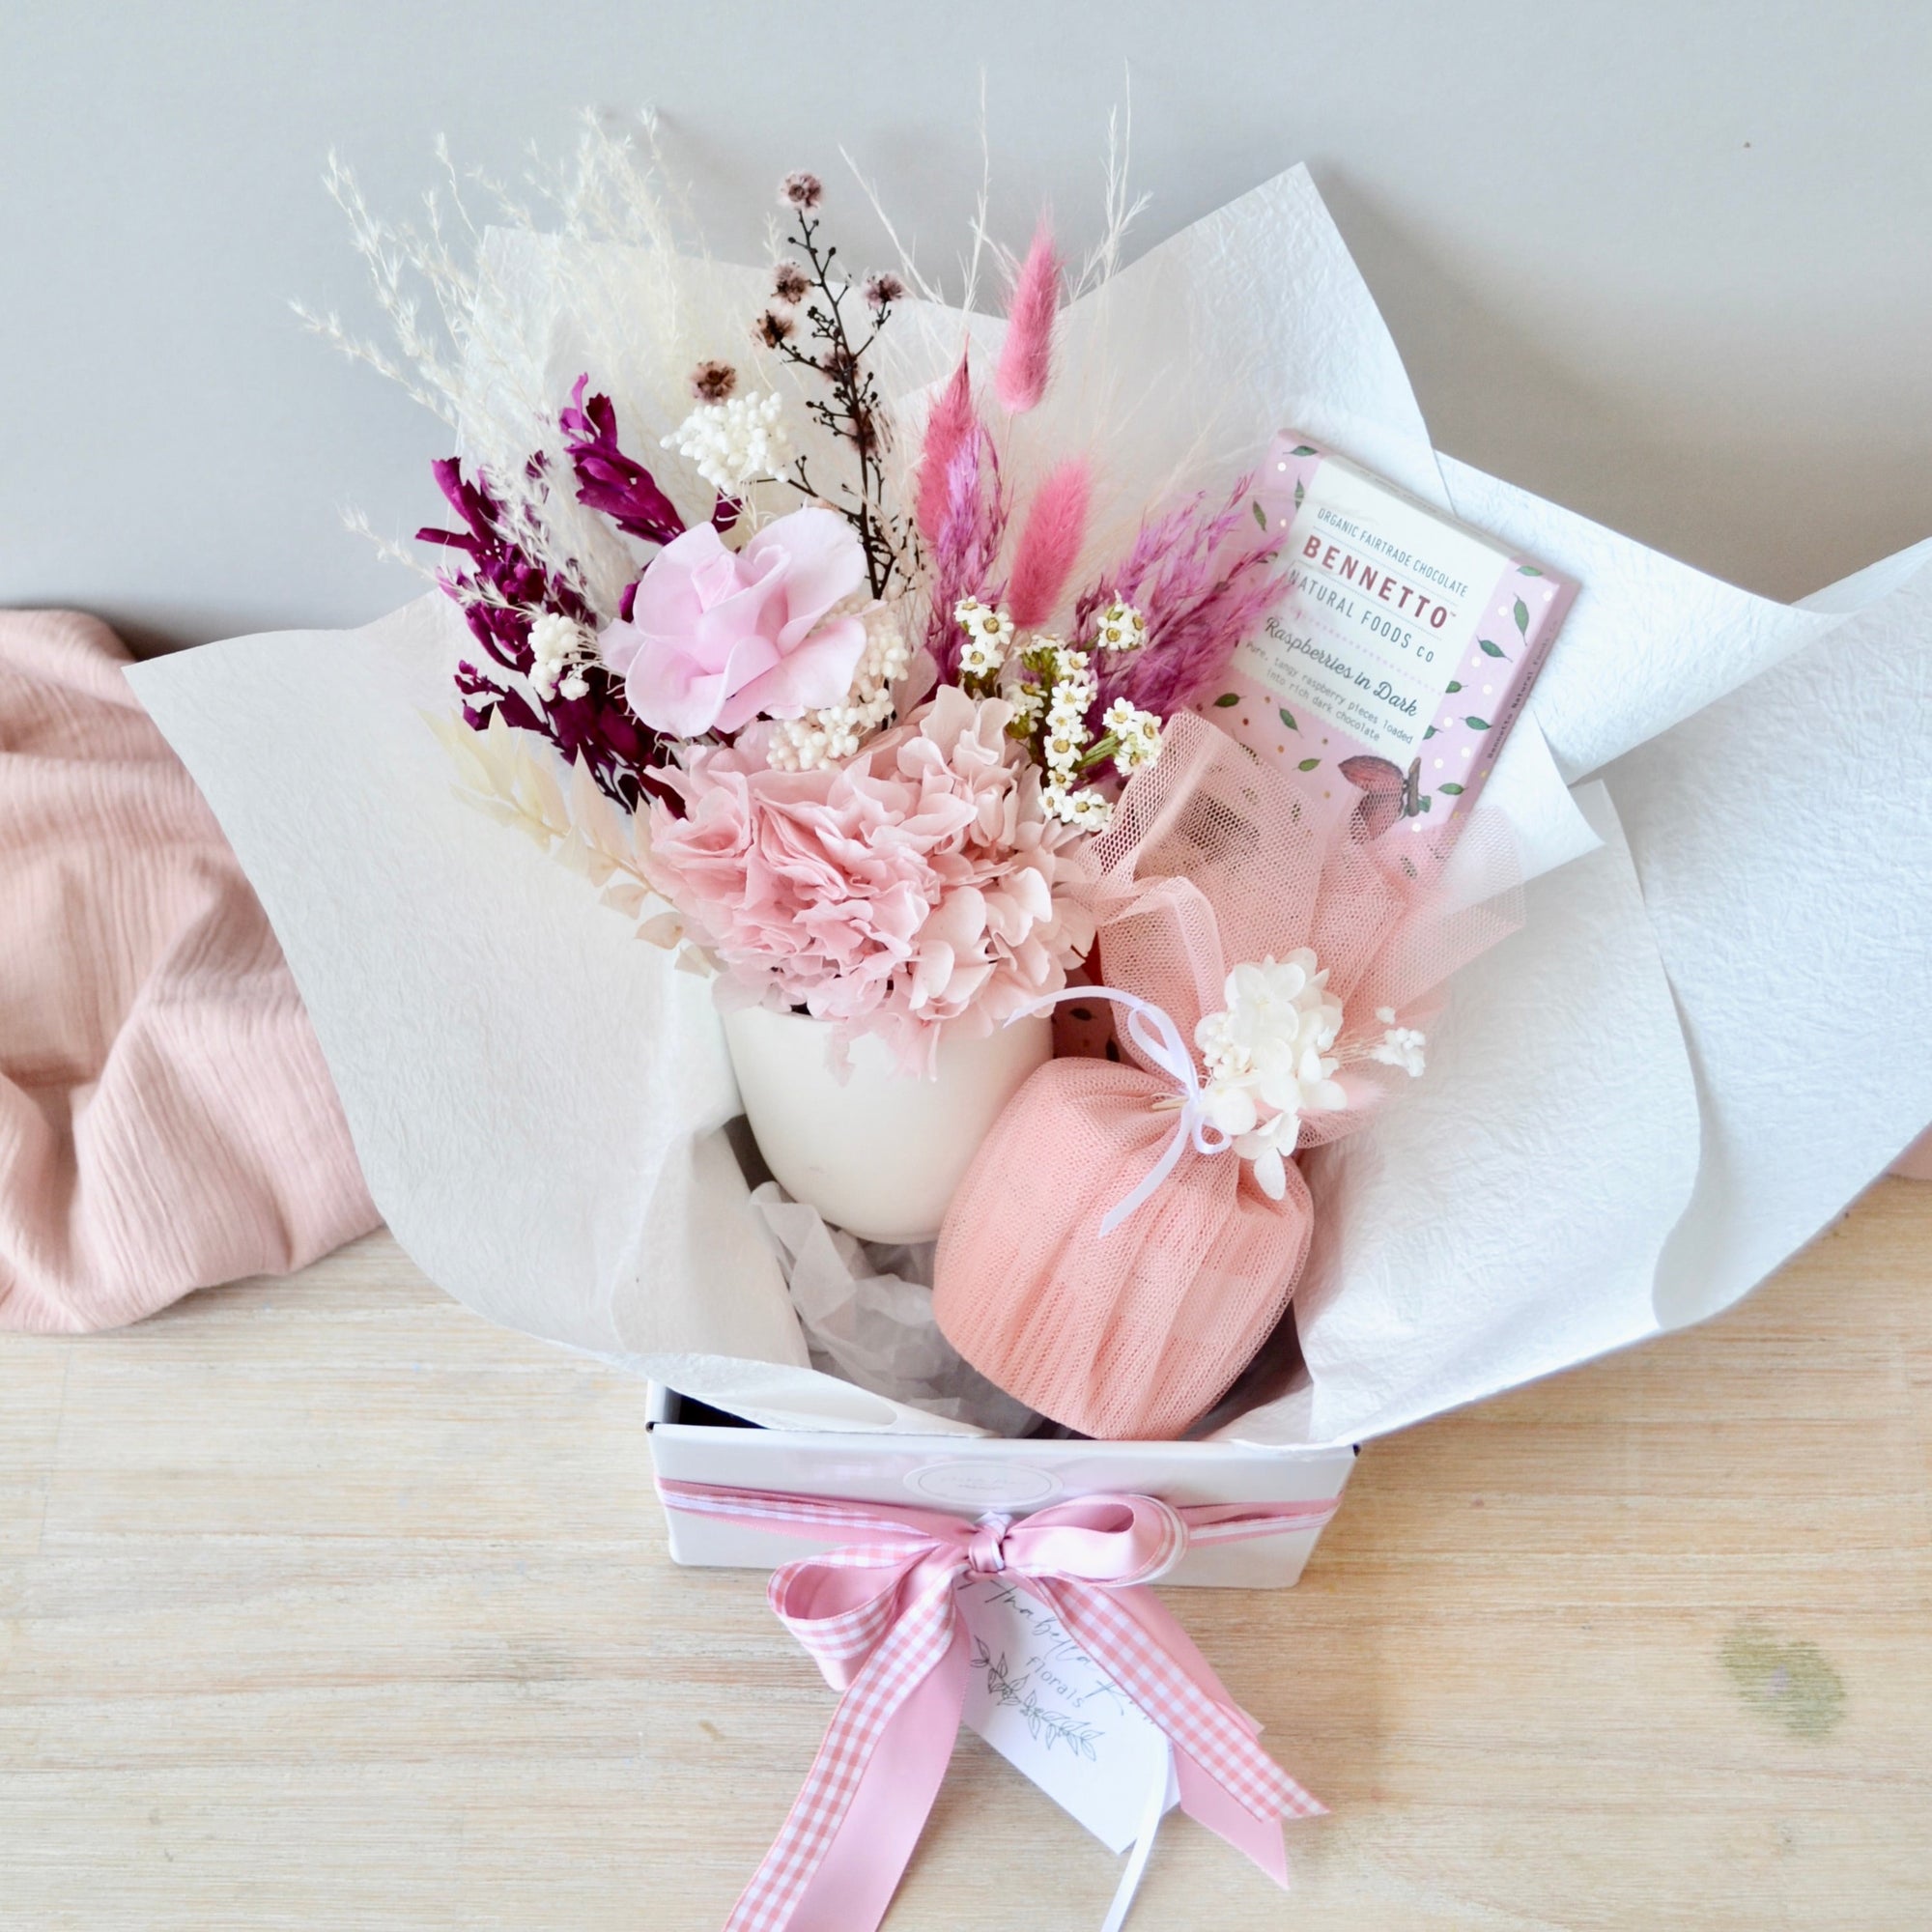 pink dried flower, candle and chocolate hamper